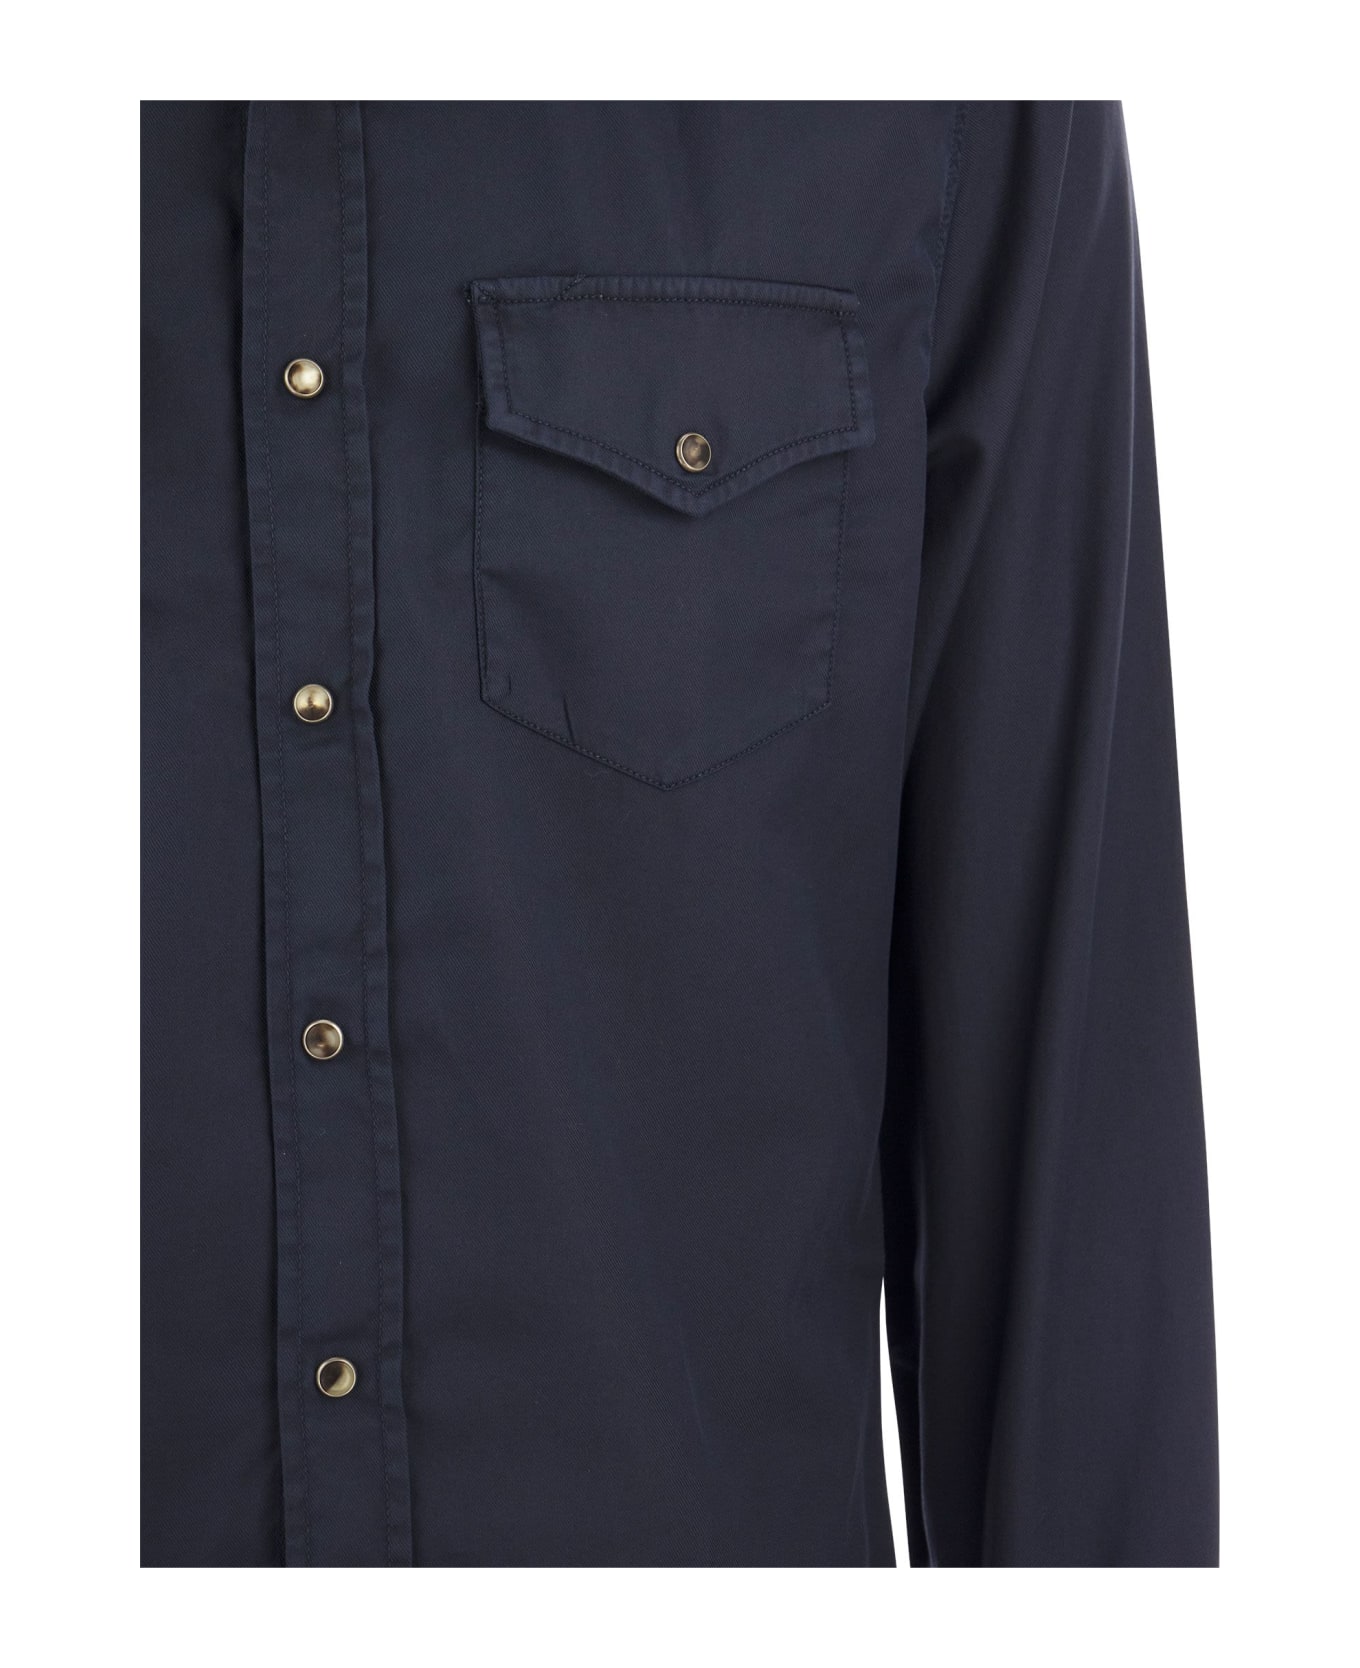 Brunello Cucinelli Garment Dyed Twill Easy Fit Shirt With Press Studs - Blue シャツ